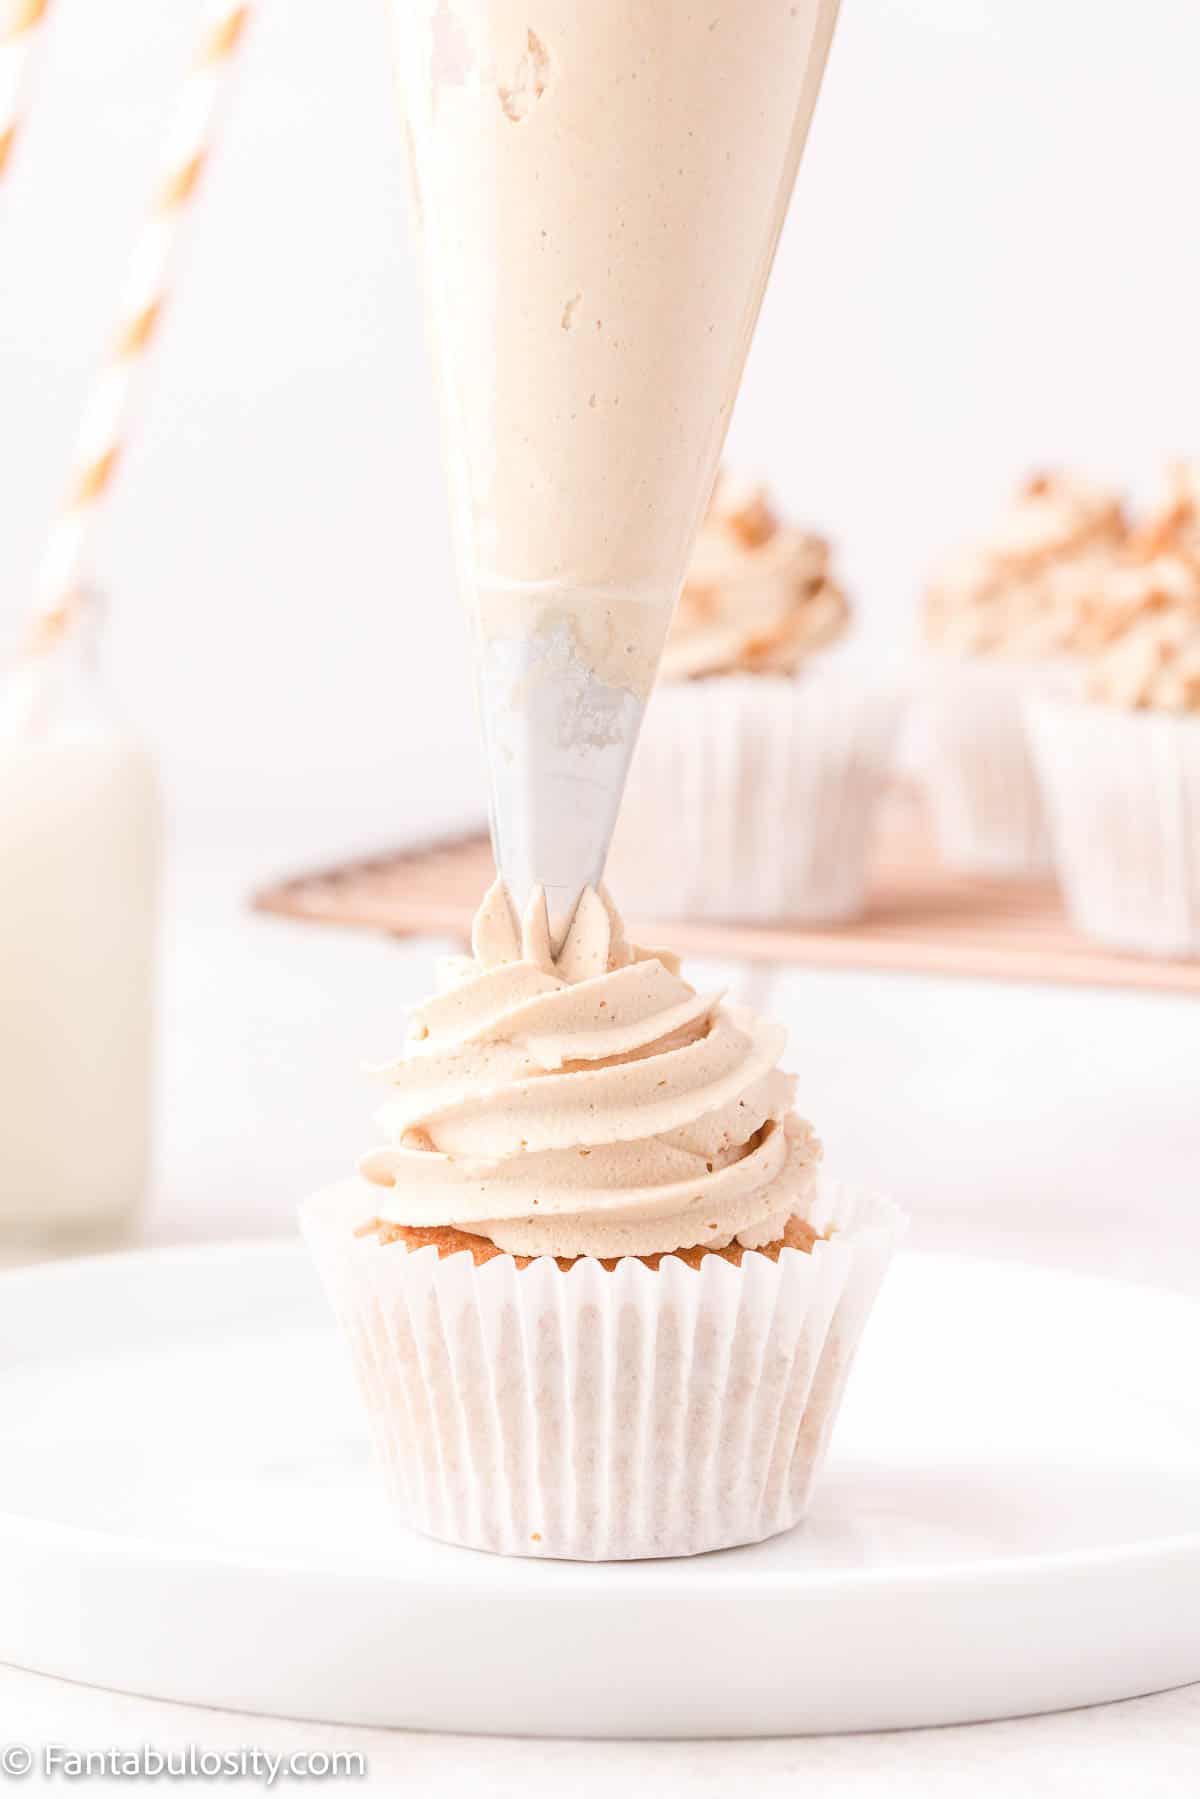 A single cupcake is shown on a white plate and a piping bag of frosting is visible piping frosting onto the cupcake